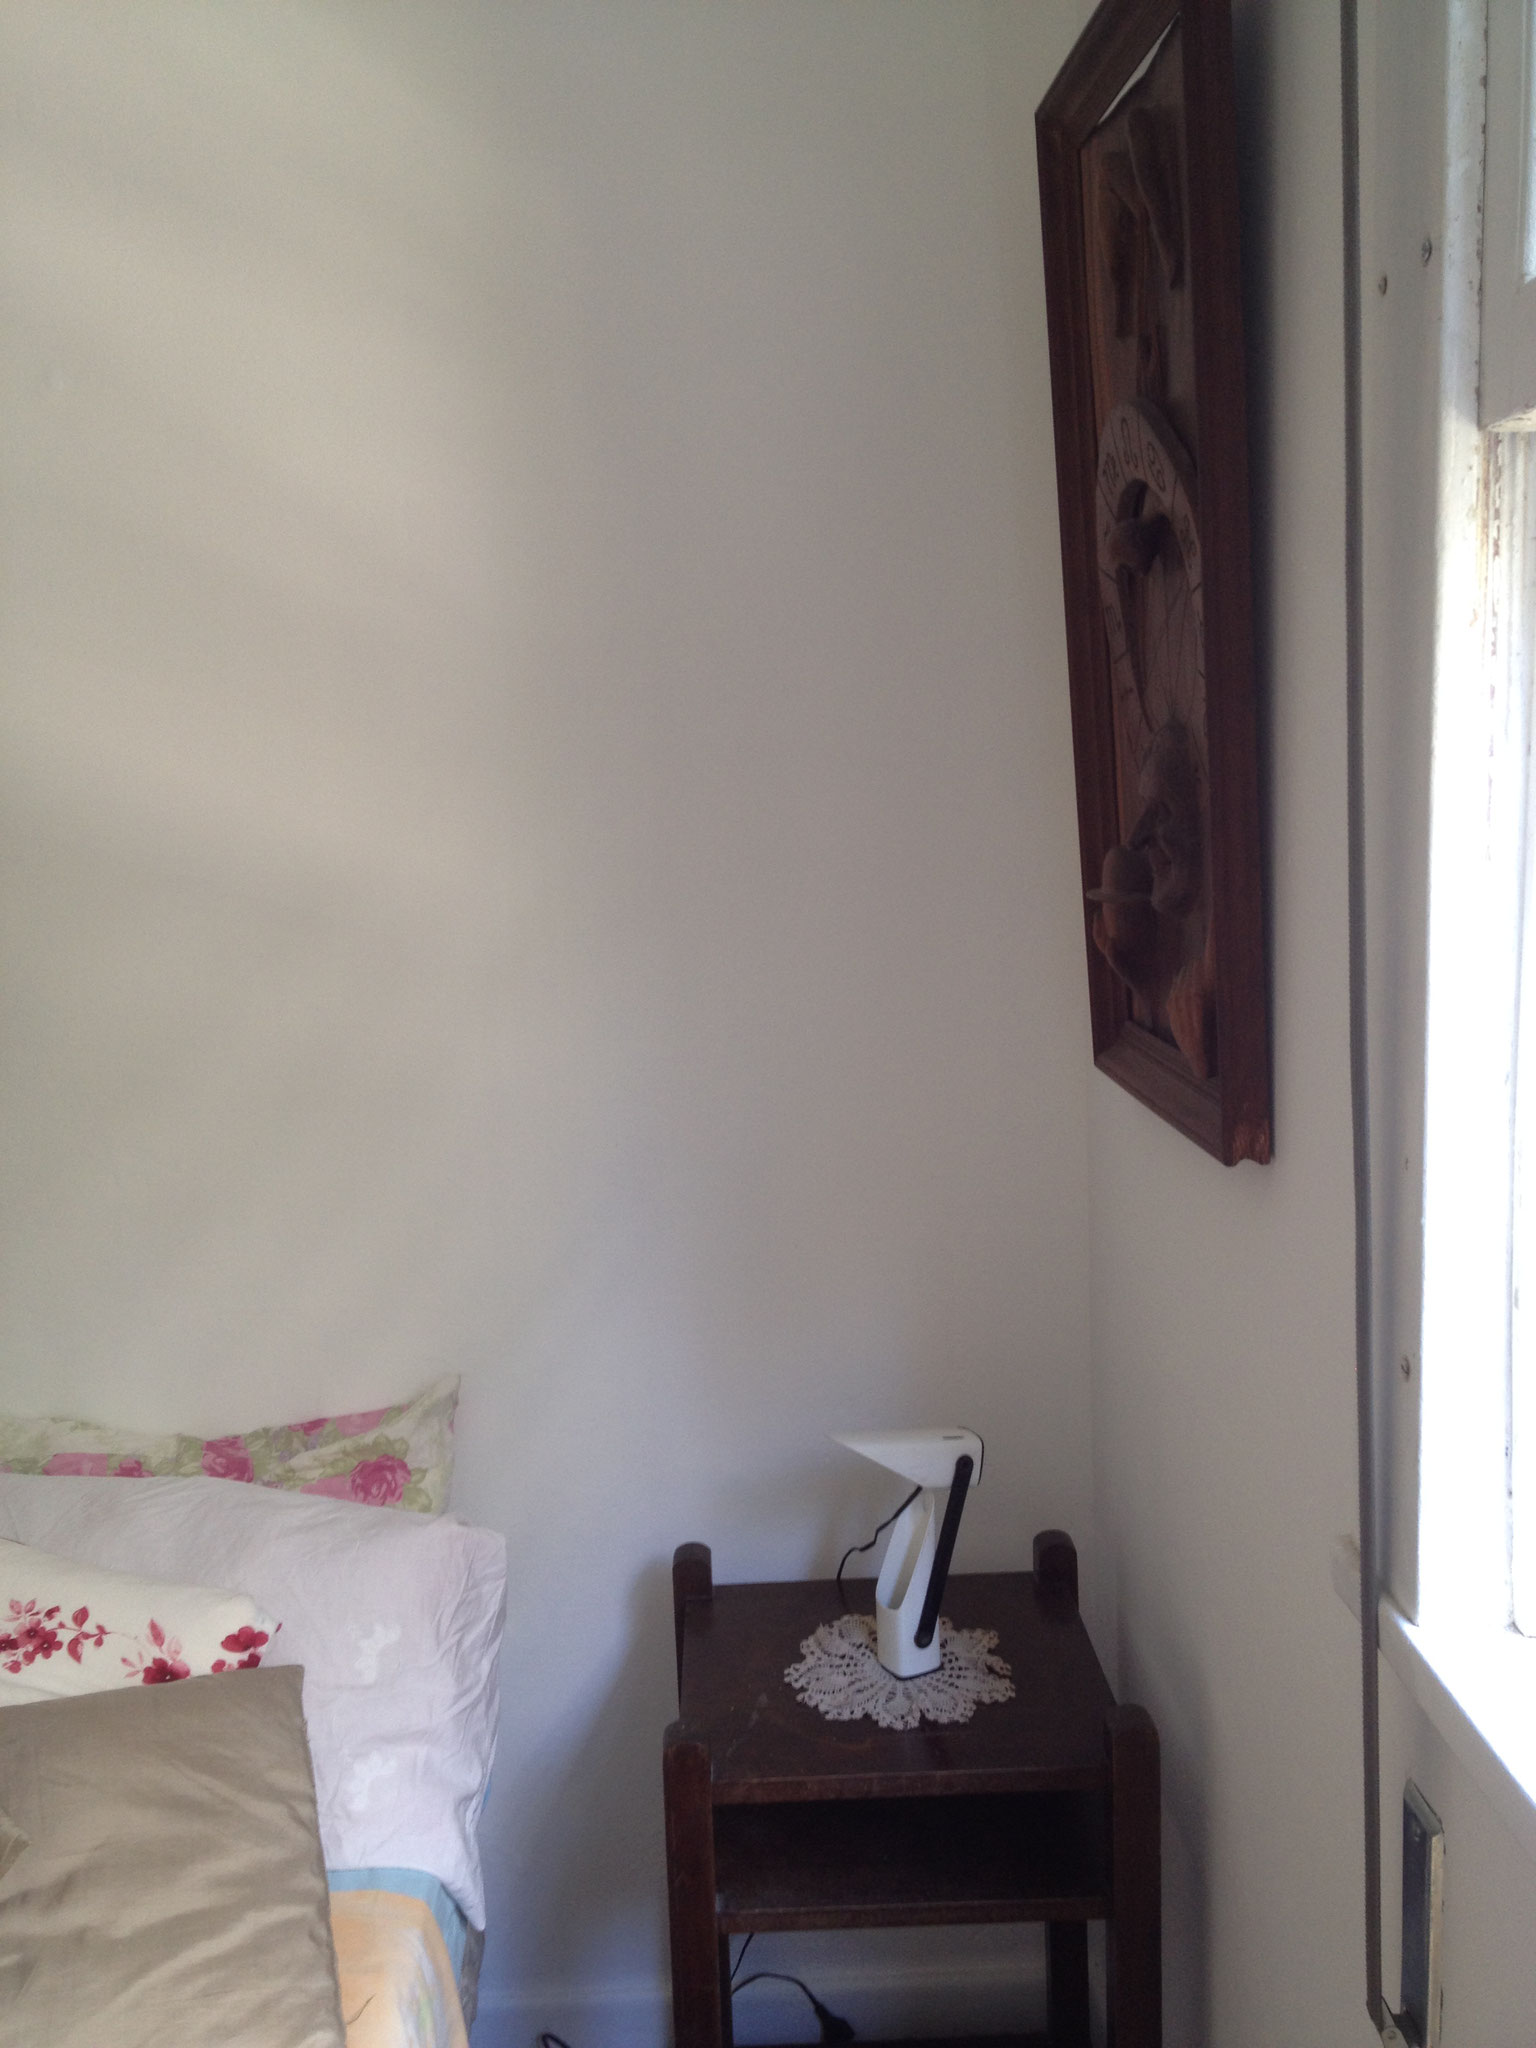 bedside table and wood skulpture on the wall of the second sleeping room